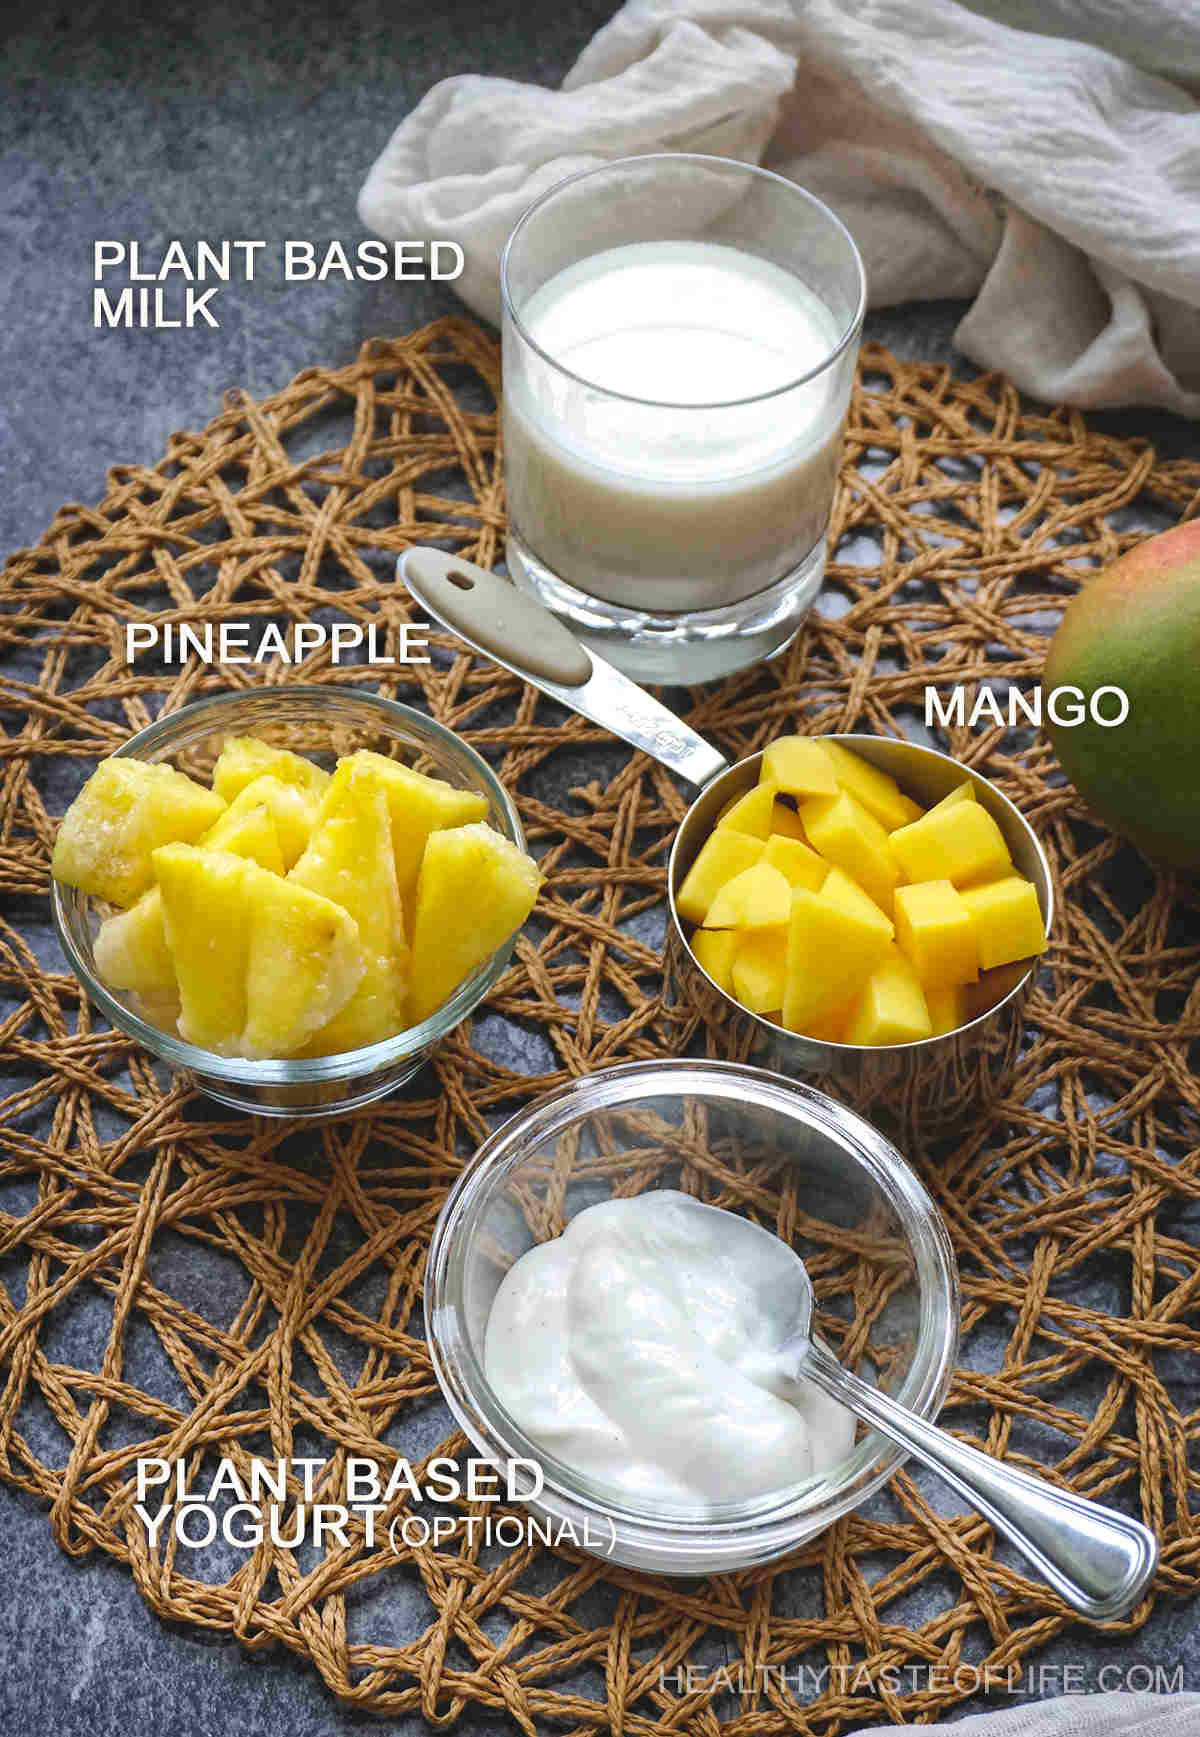 Ingredients for dairy free pineapple and mango smoothie.